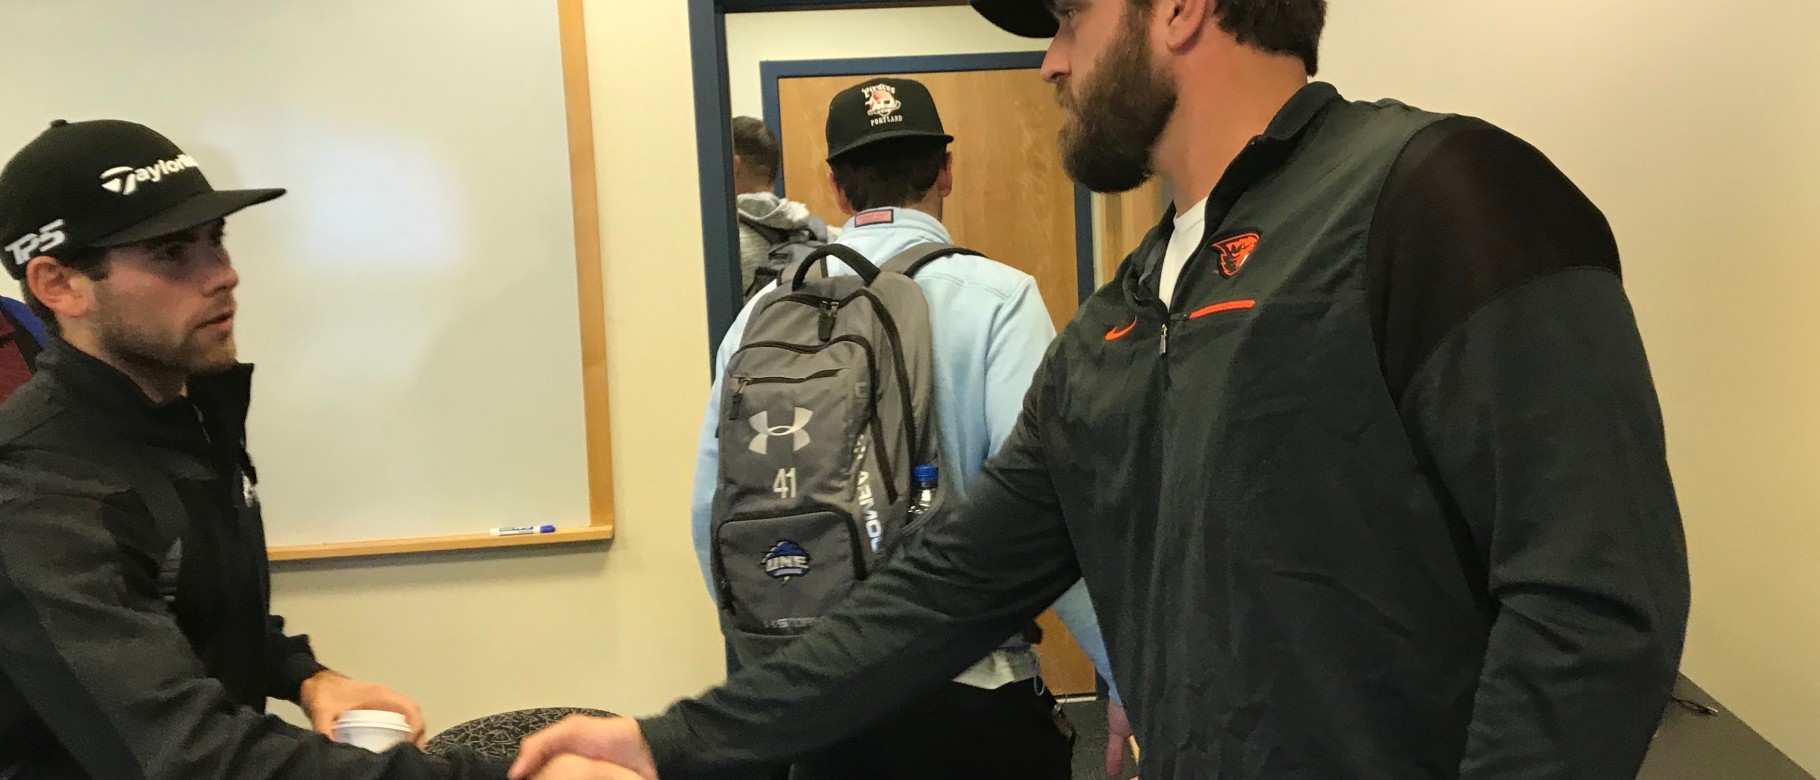 San Francisco Giants pitcher Josh Osich greets UNE students after class